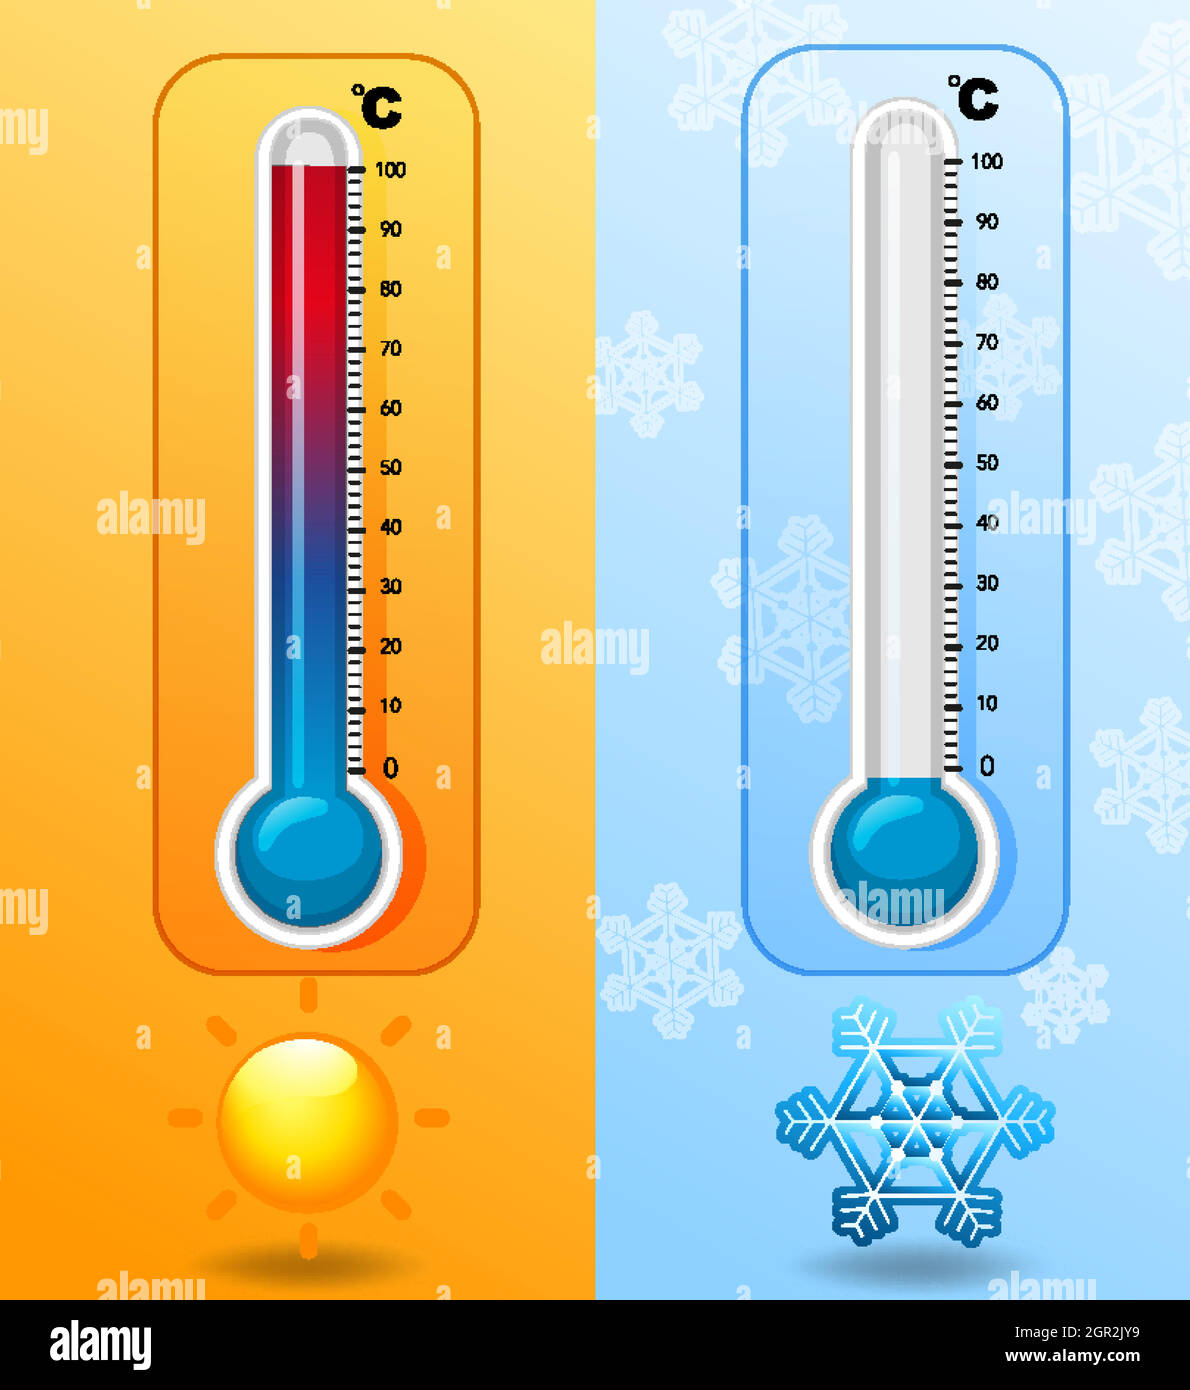 https://c8.alamy.com/comp/2GR2JY9/two-thermometers-in-hot-and-cold-weather-2GR2JY9.jpg